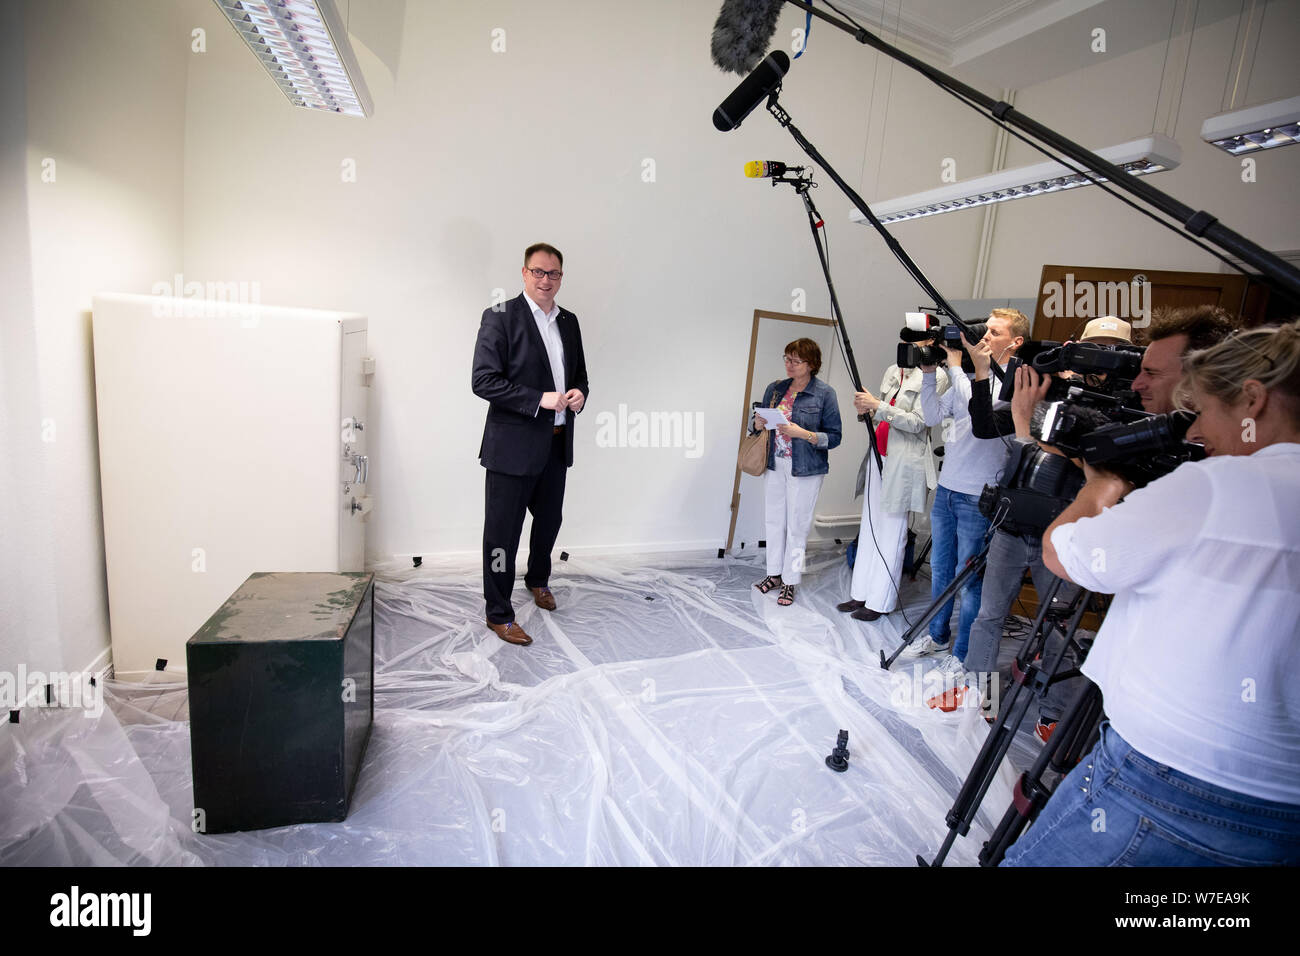 06 August 2019, Schleswig-Holstein, Lübeck: Jan Lindenau (SPD), mayor of Lübeck, stands in a room with two locked safes at a press event in the town hall. Using a fine picking tool and heavy equipment, two security technicians opened the safes in Lübeck's town hall on Tuesday, which had been unnoticed for decades. According to the city, the contents of the safes, which probably date from the 1950s, were unknown. Photo: Christian Charisius/dpa Stock Photo